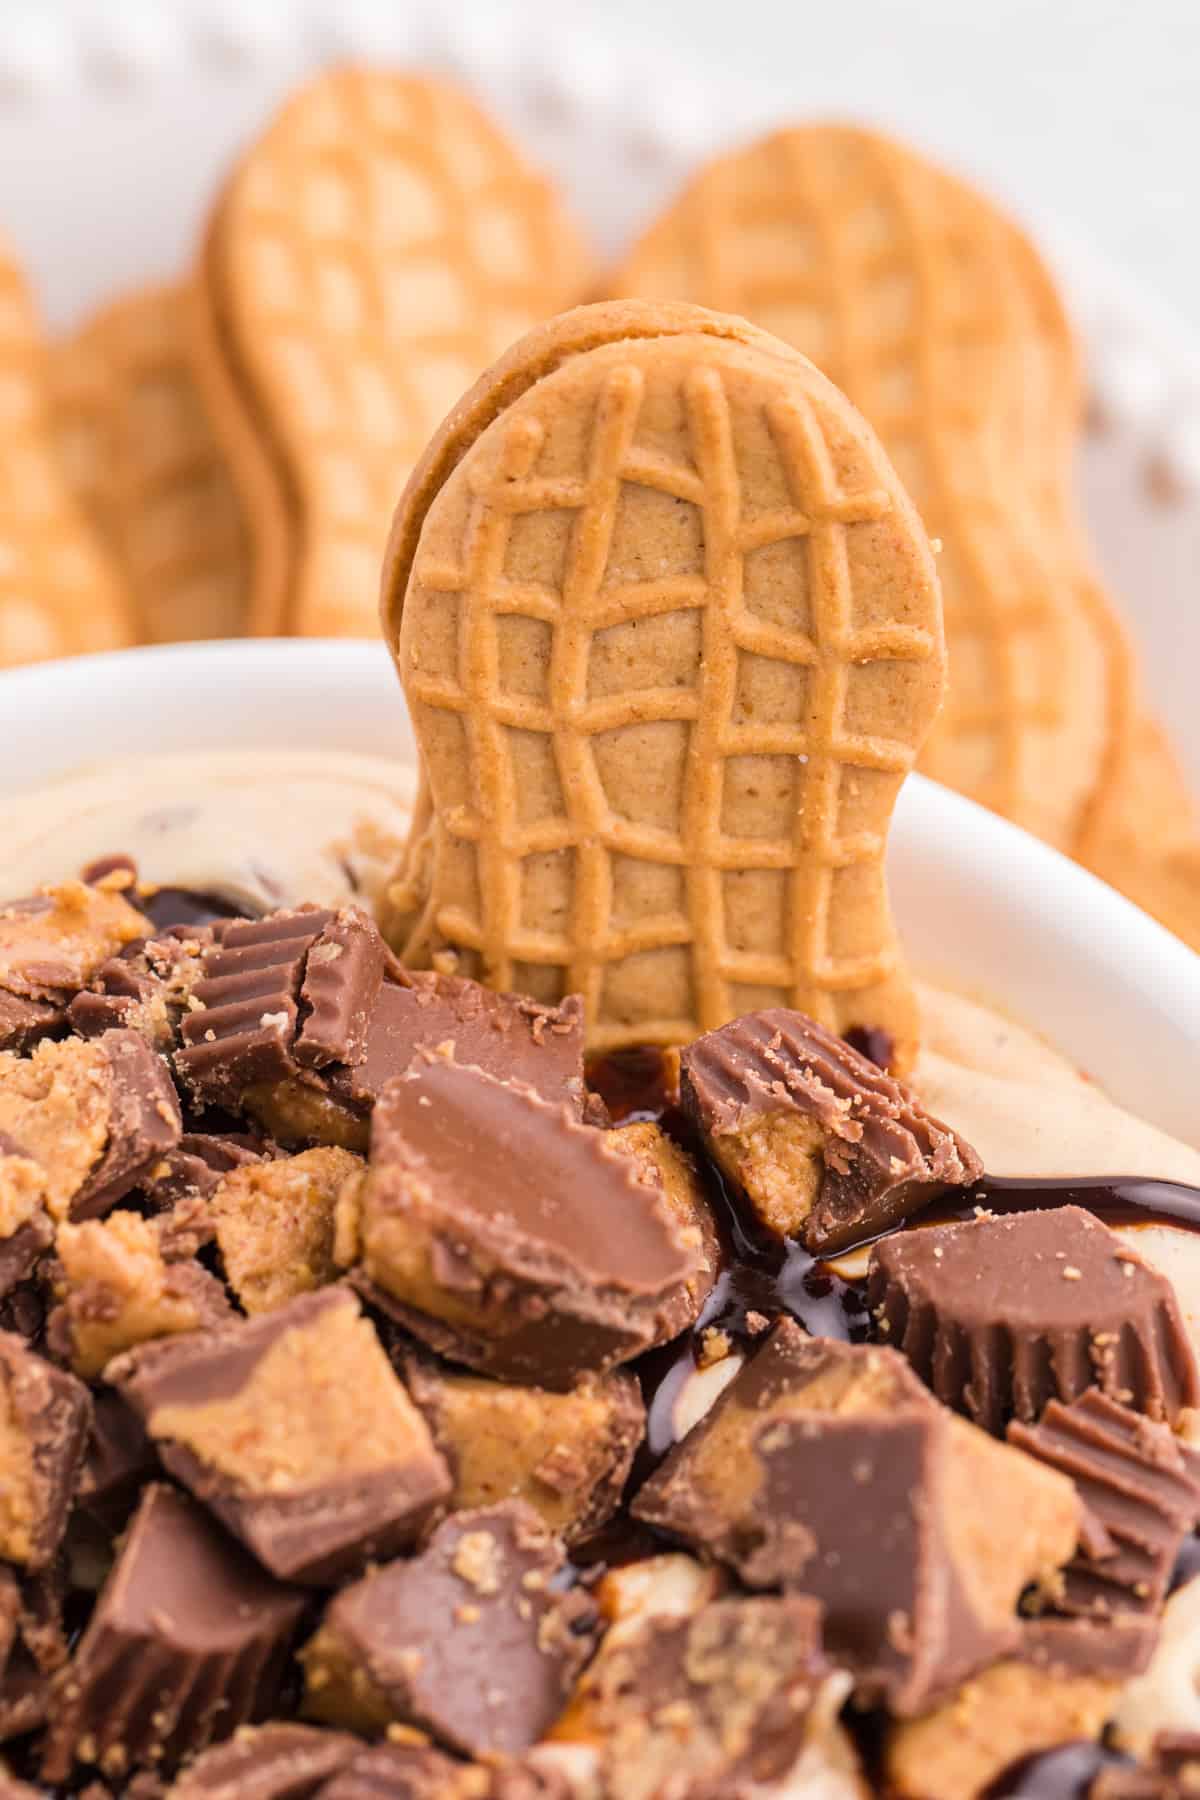 Nutter Butter Cookie sticking out of Reese's Peanut Butter Cup Dip with more cookies in the background.